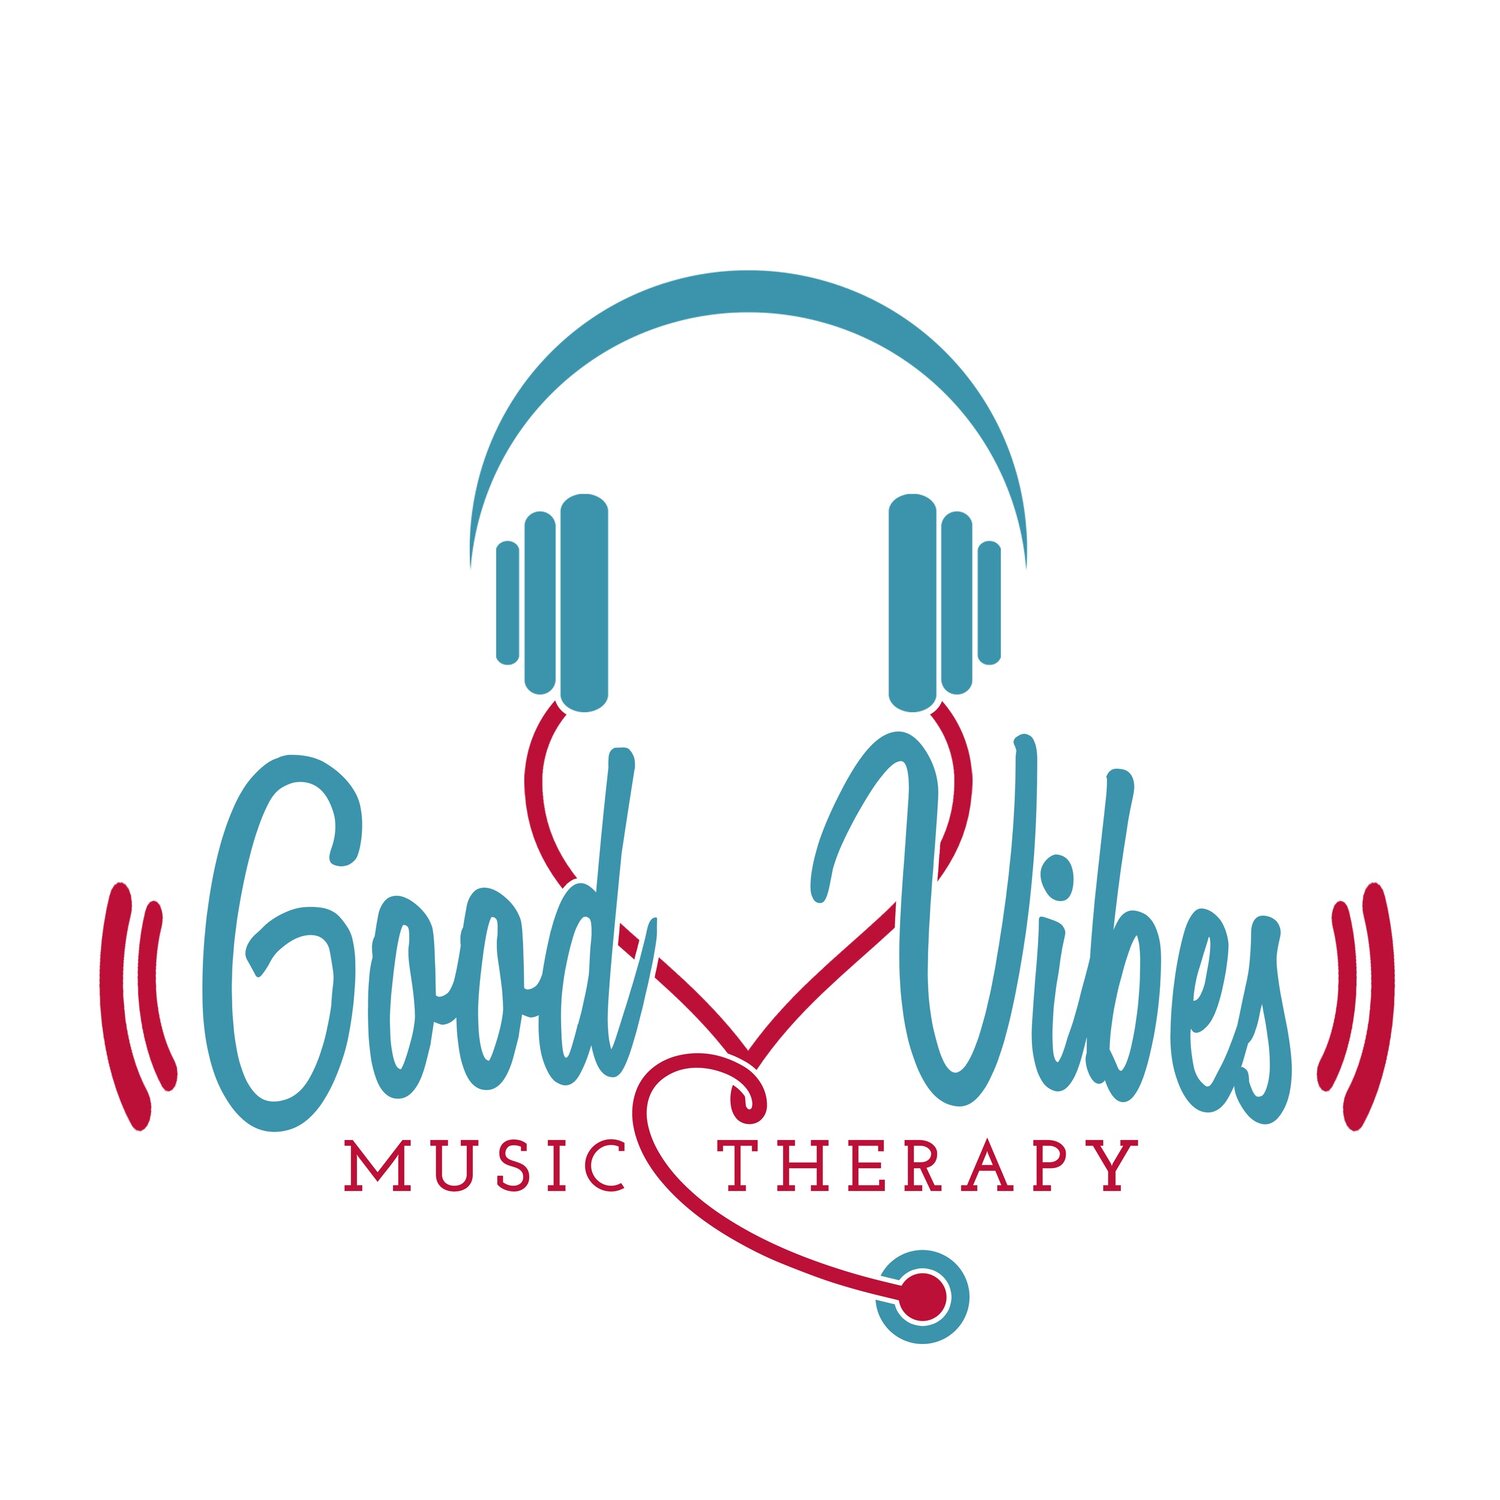 Good Vibes Music Therapy